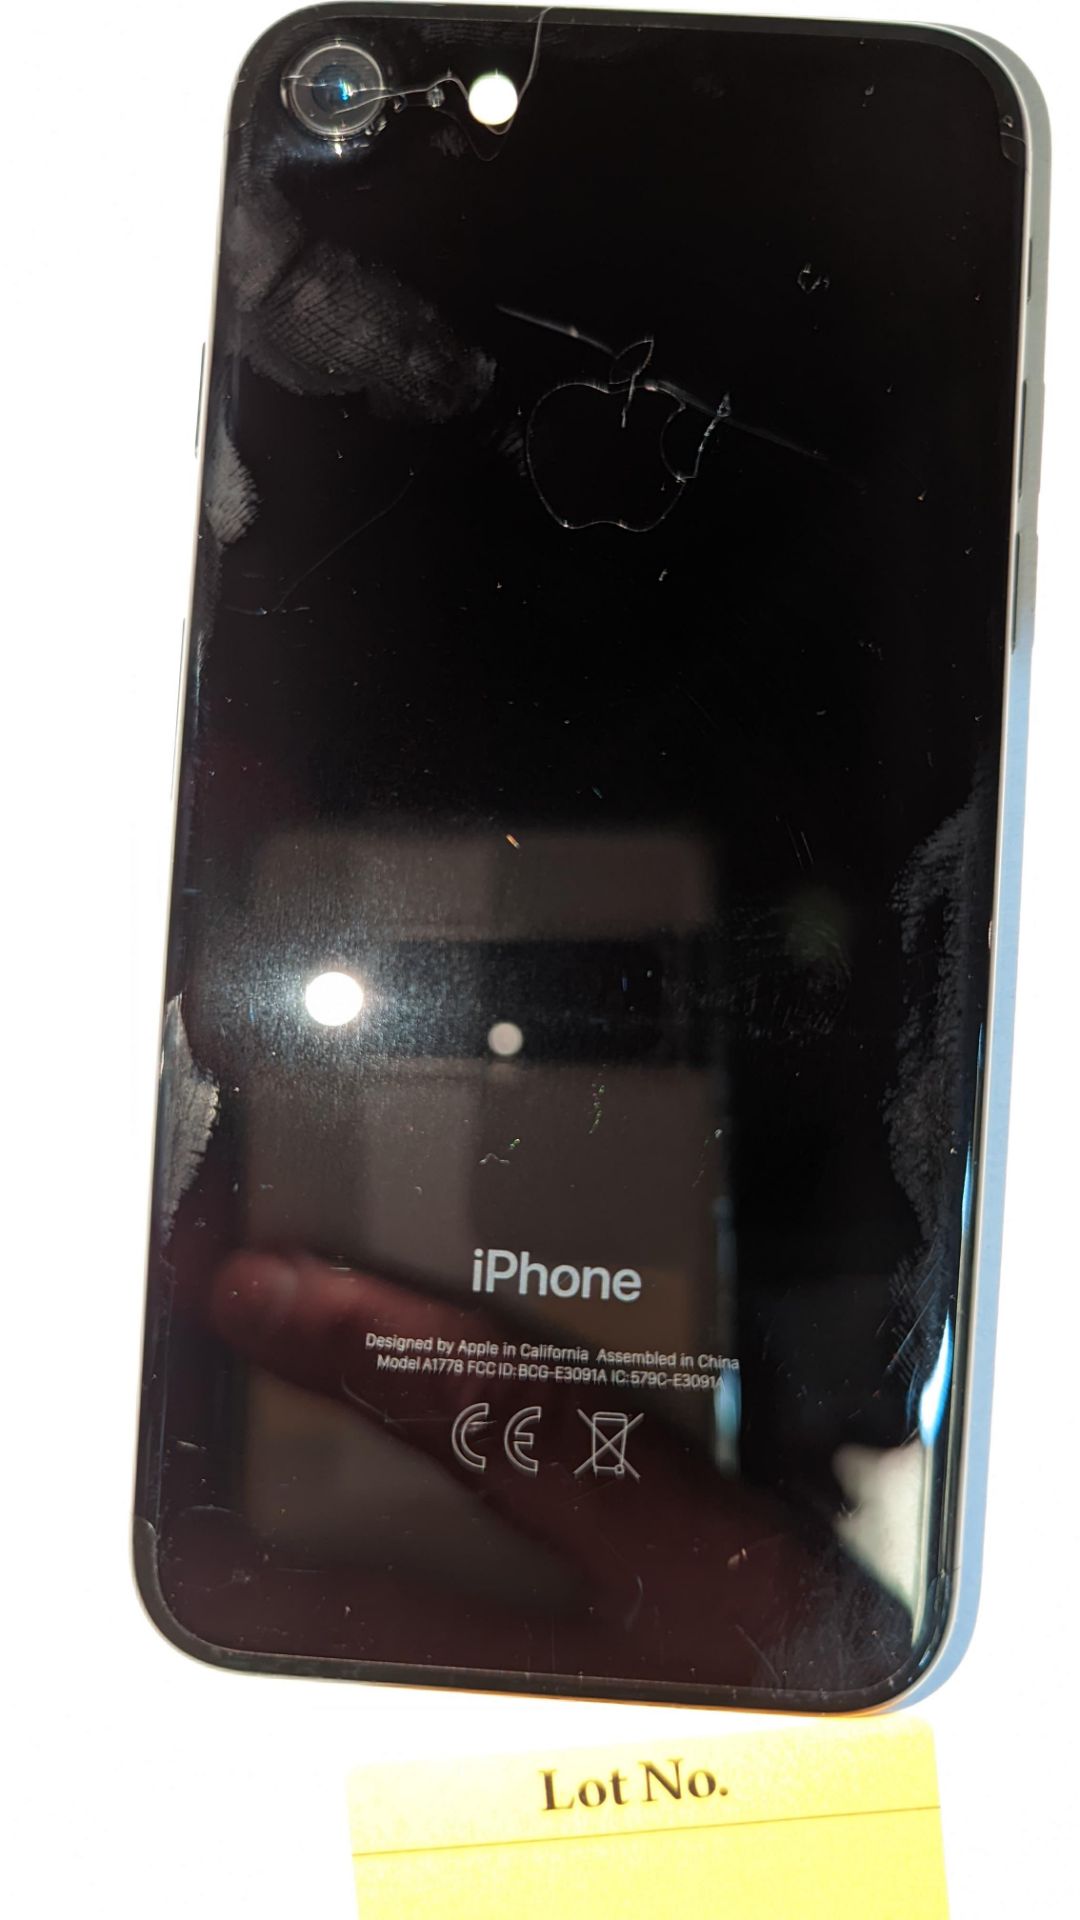 Apple iPhone 7, 32GB capacity, model A1778. No ancillaries or accessories - Image 9 of 12